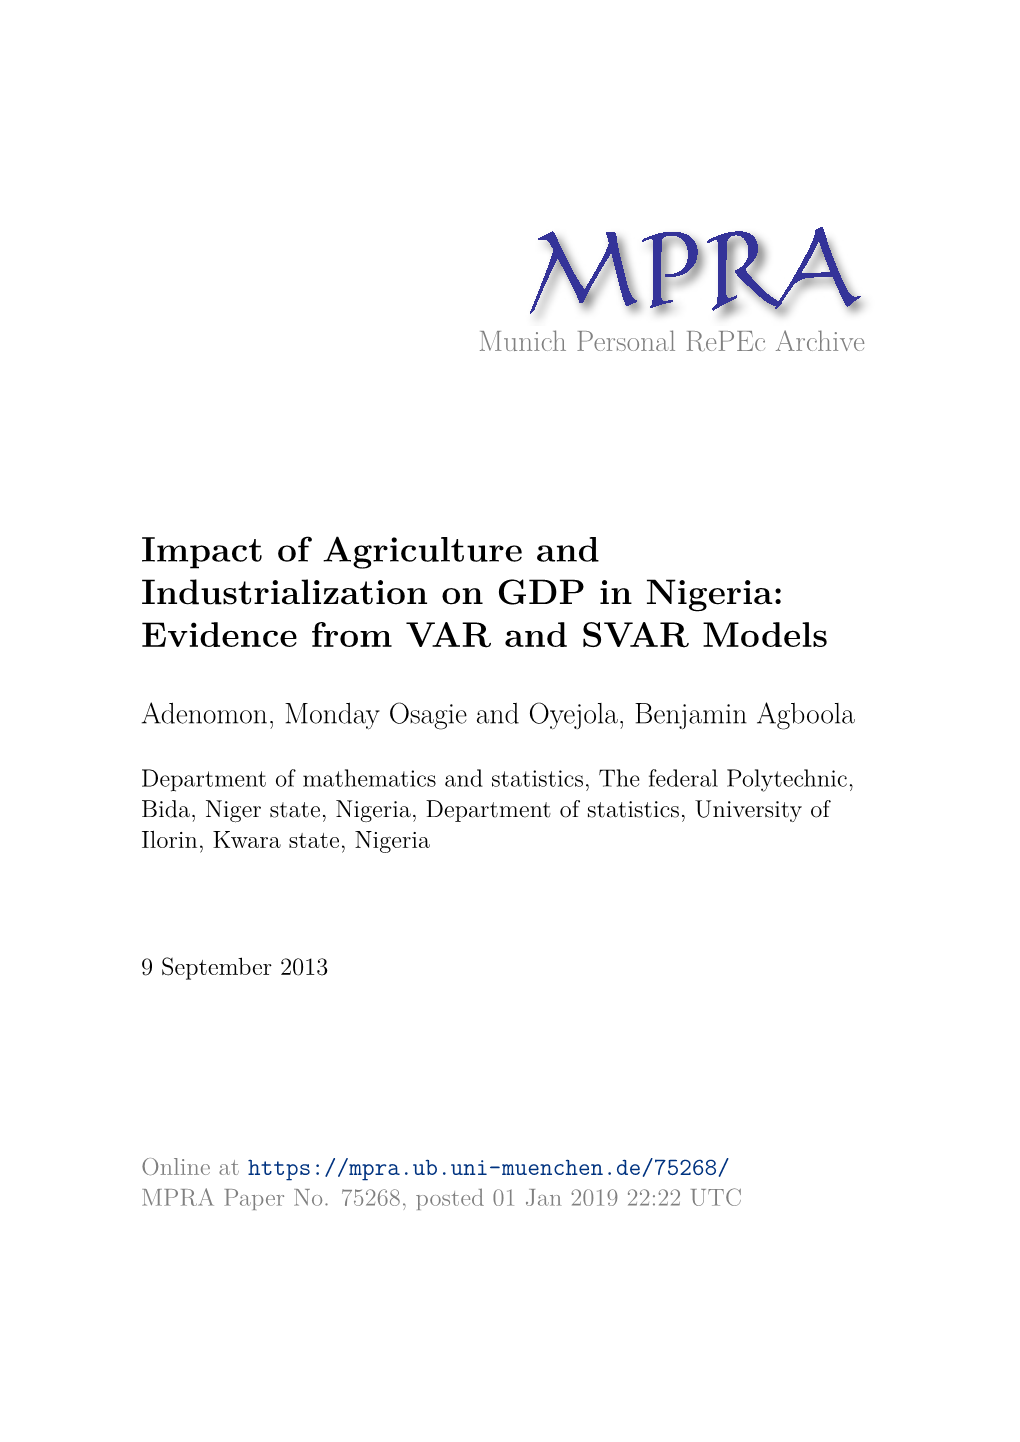 Impact of Agriculture and Industrialization on GDP in Nigeria: Evidence from VAR and SVAR Models